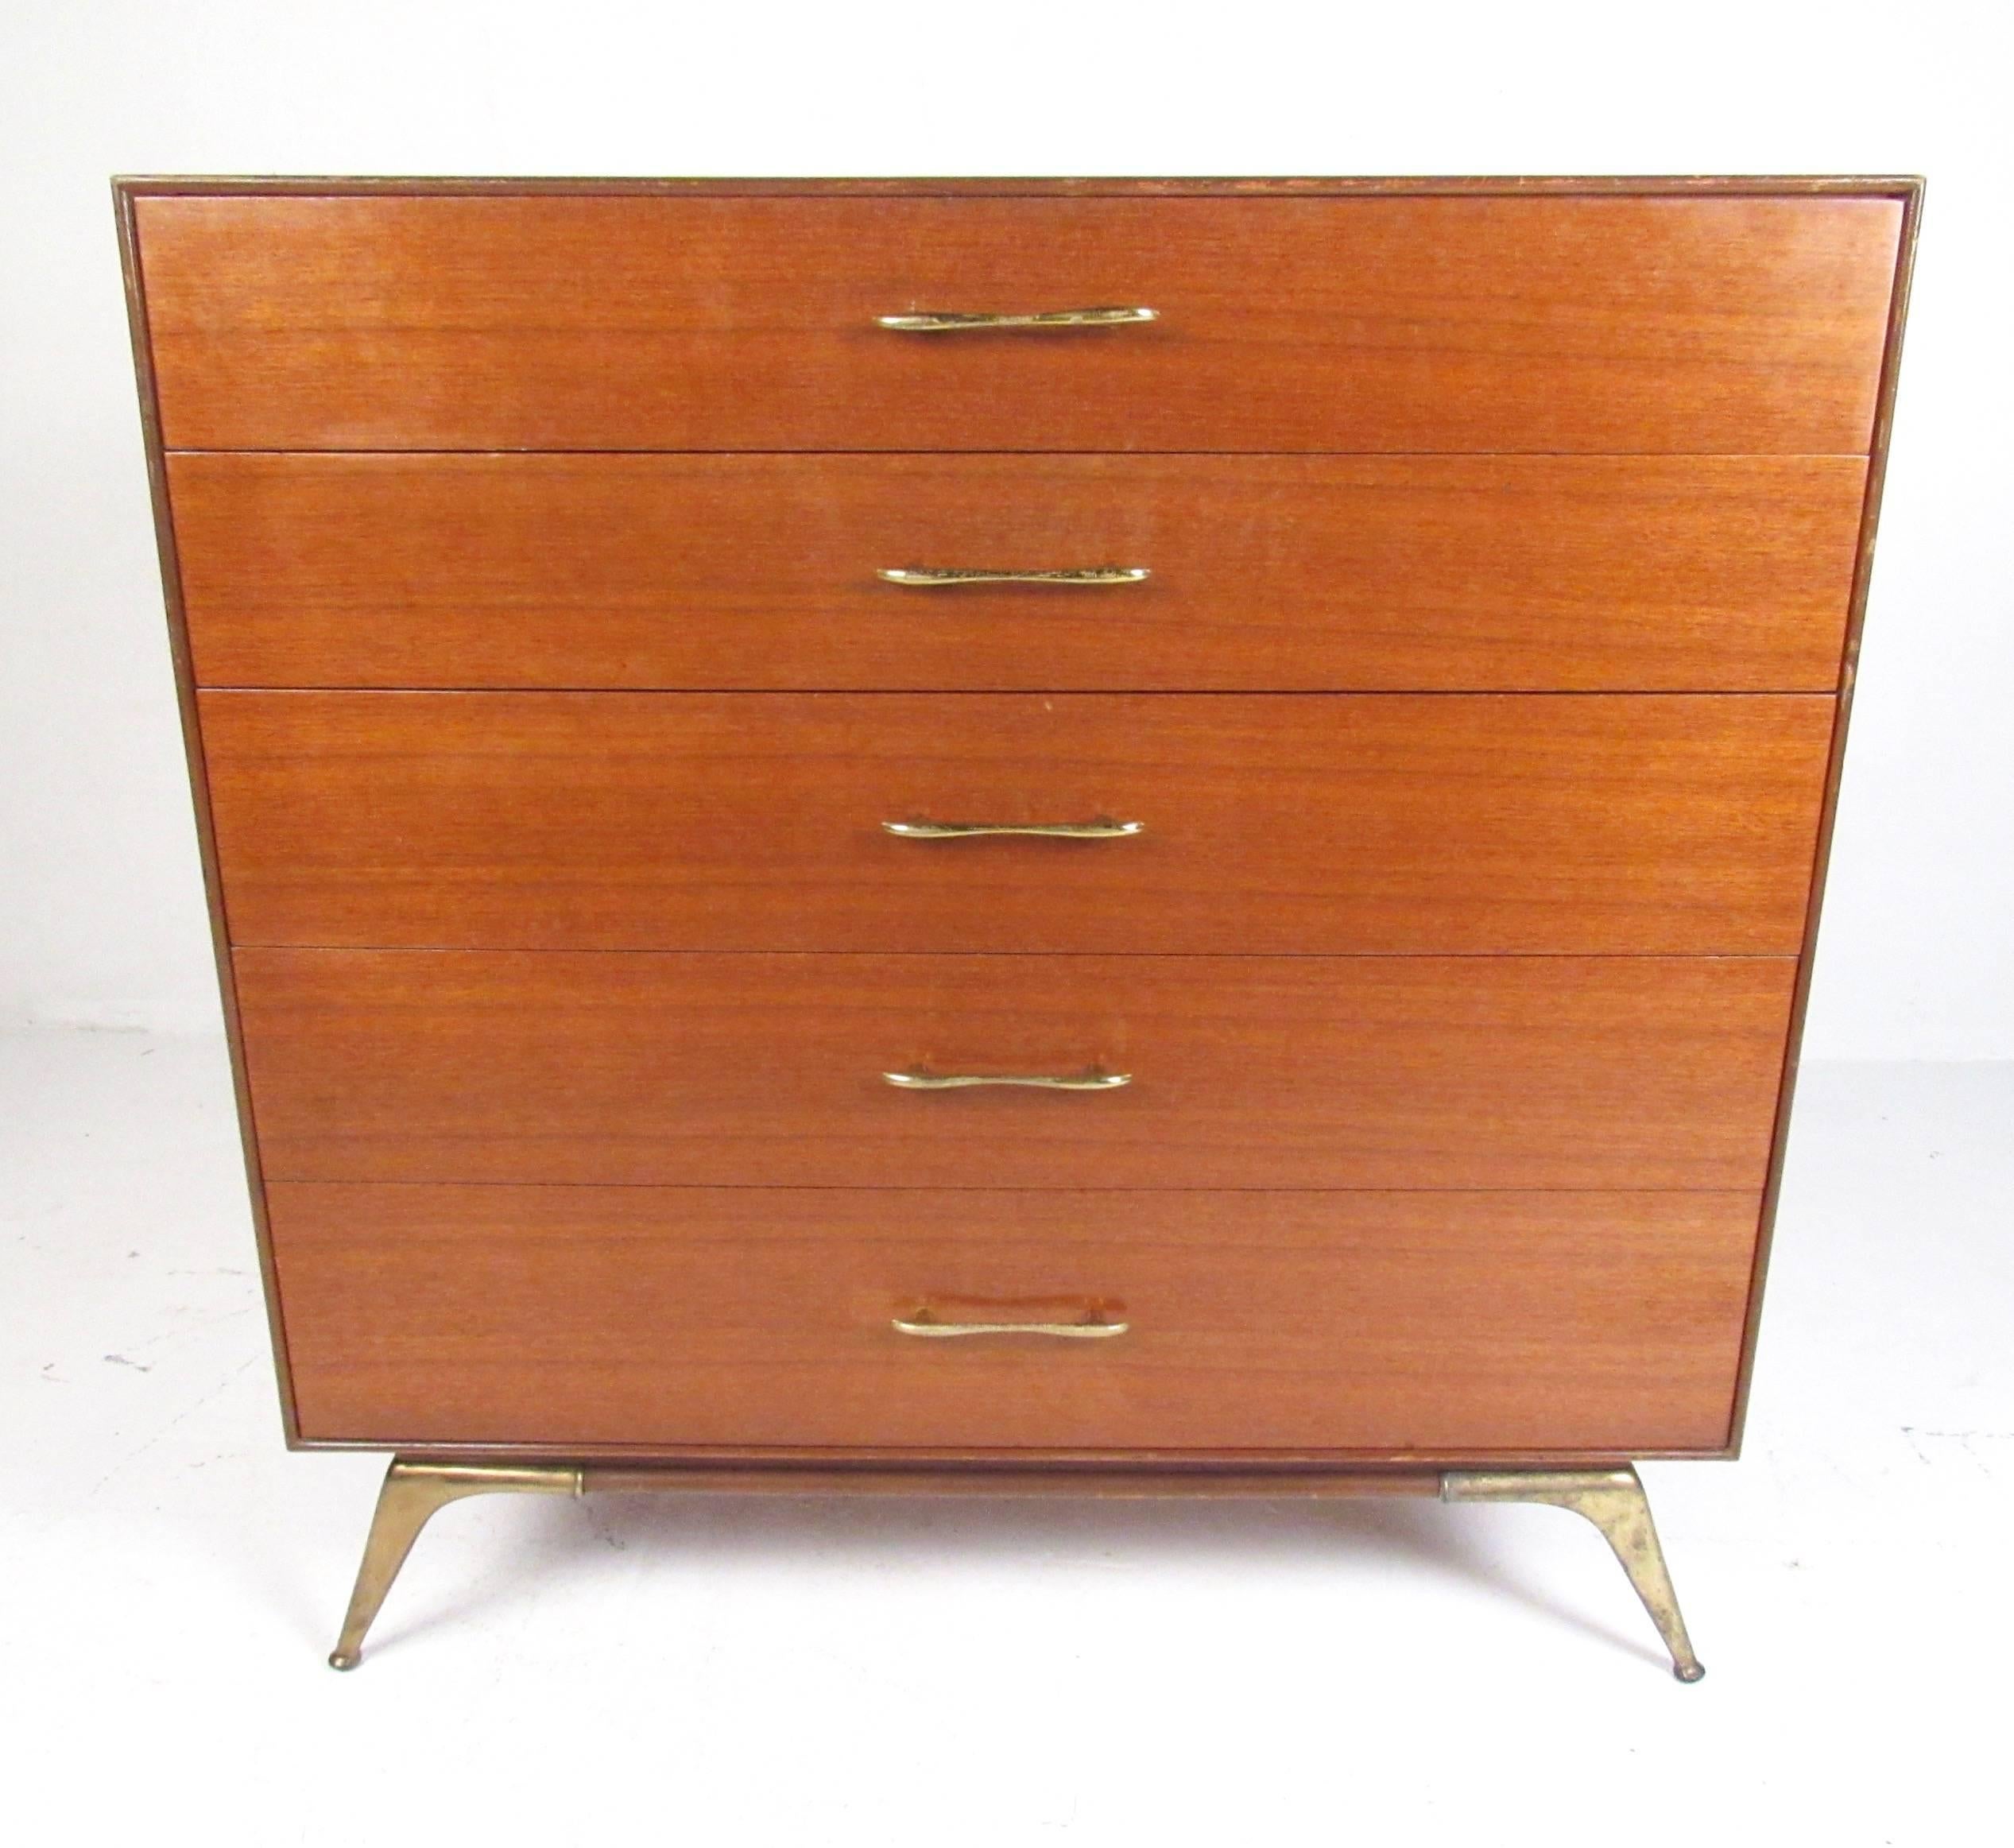 This quality midcentury dresser by R-Way furniture features retro modern design and spacious storage drawers. Stylish brass drawer pulls add to the vintage appeal of this light colored wood finished highboy dresser. Ideal dresser for any interior,